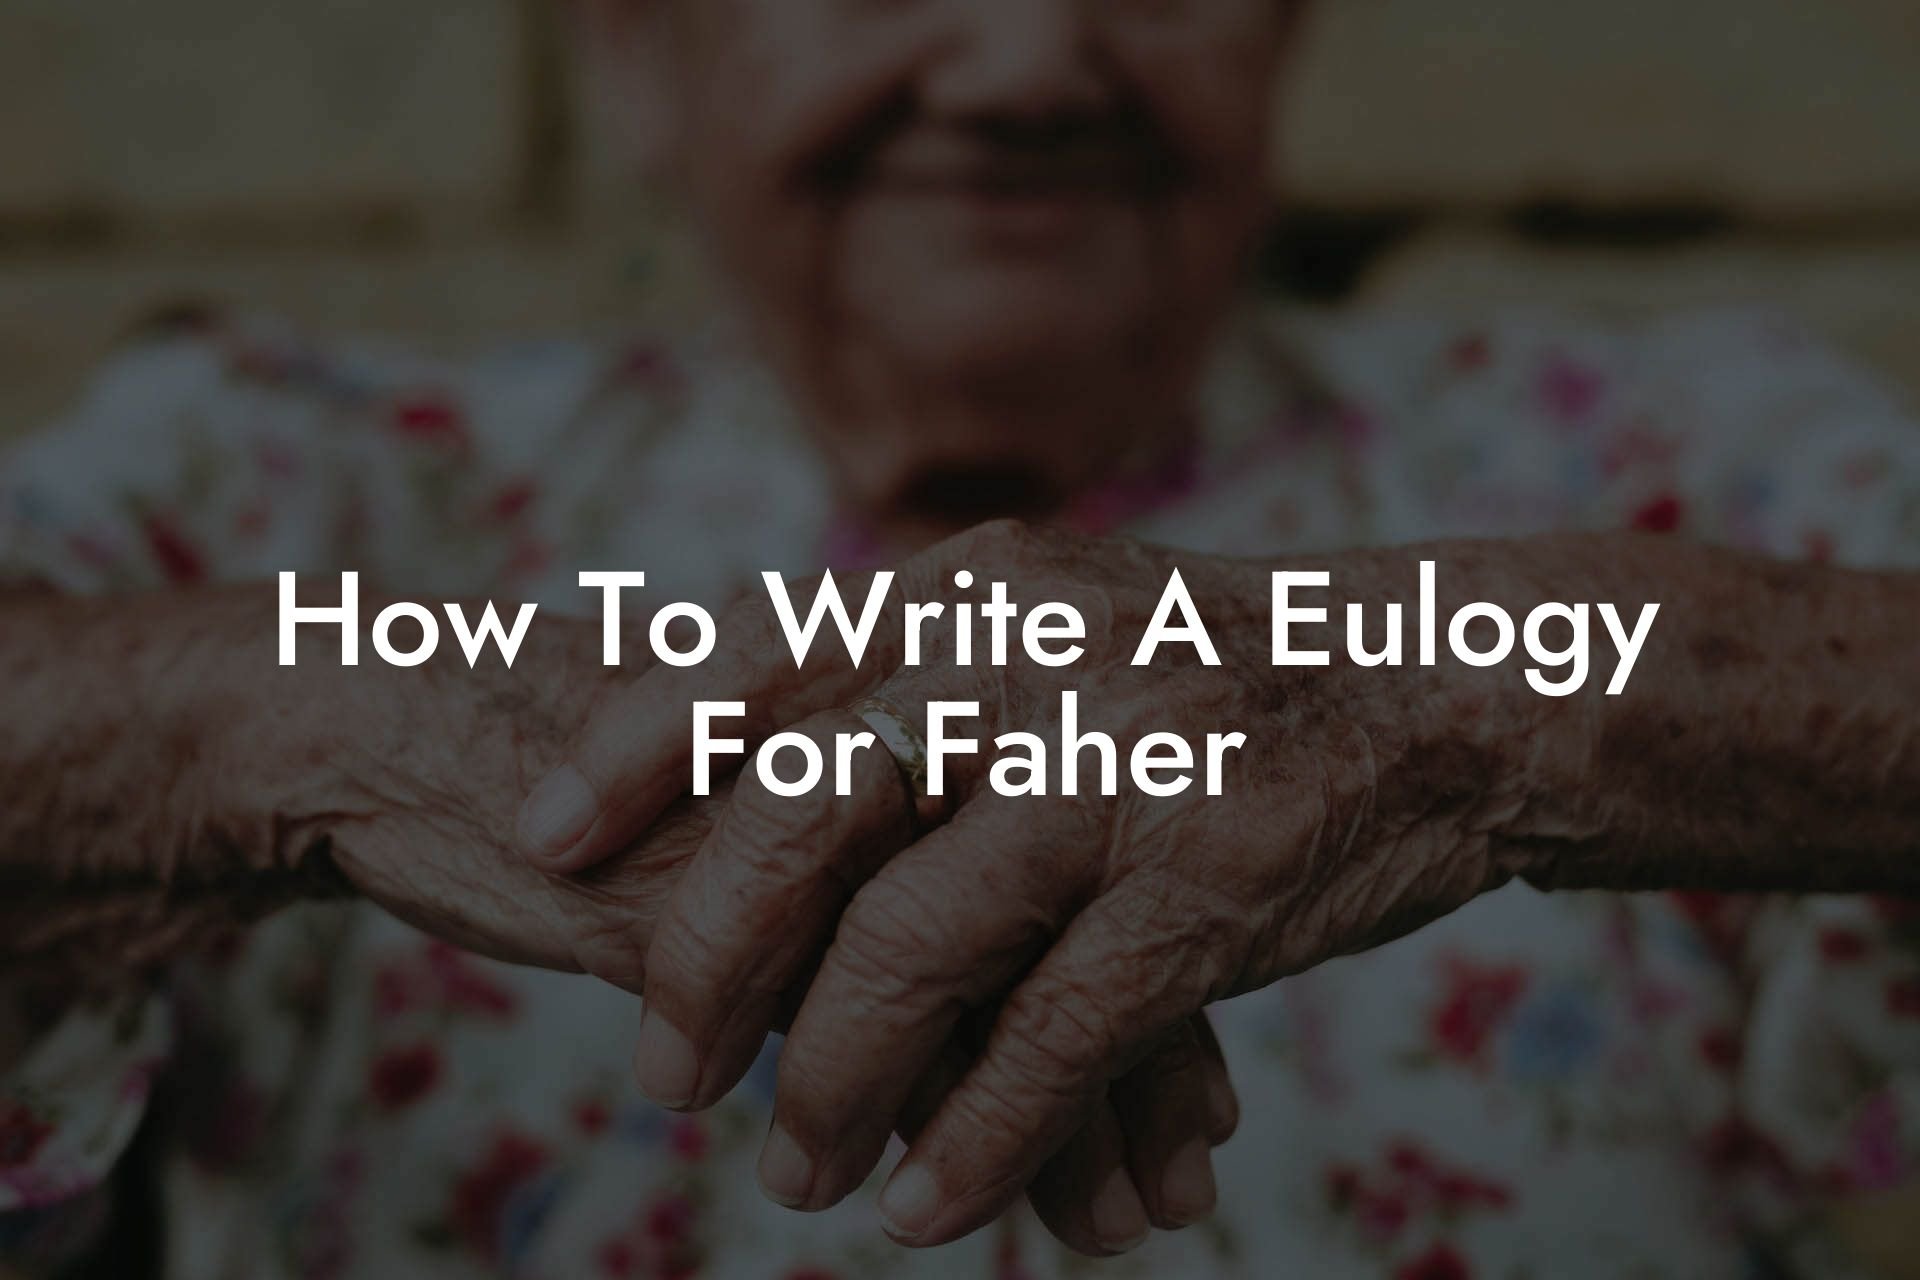 How To Write A Eulogy For Faher